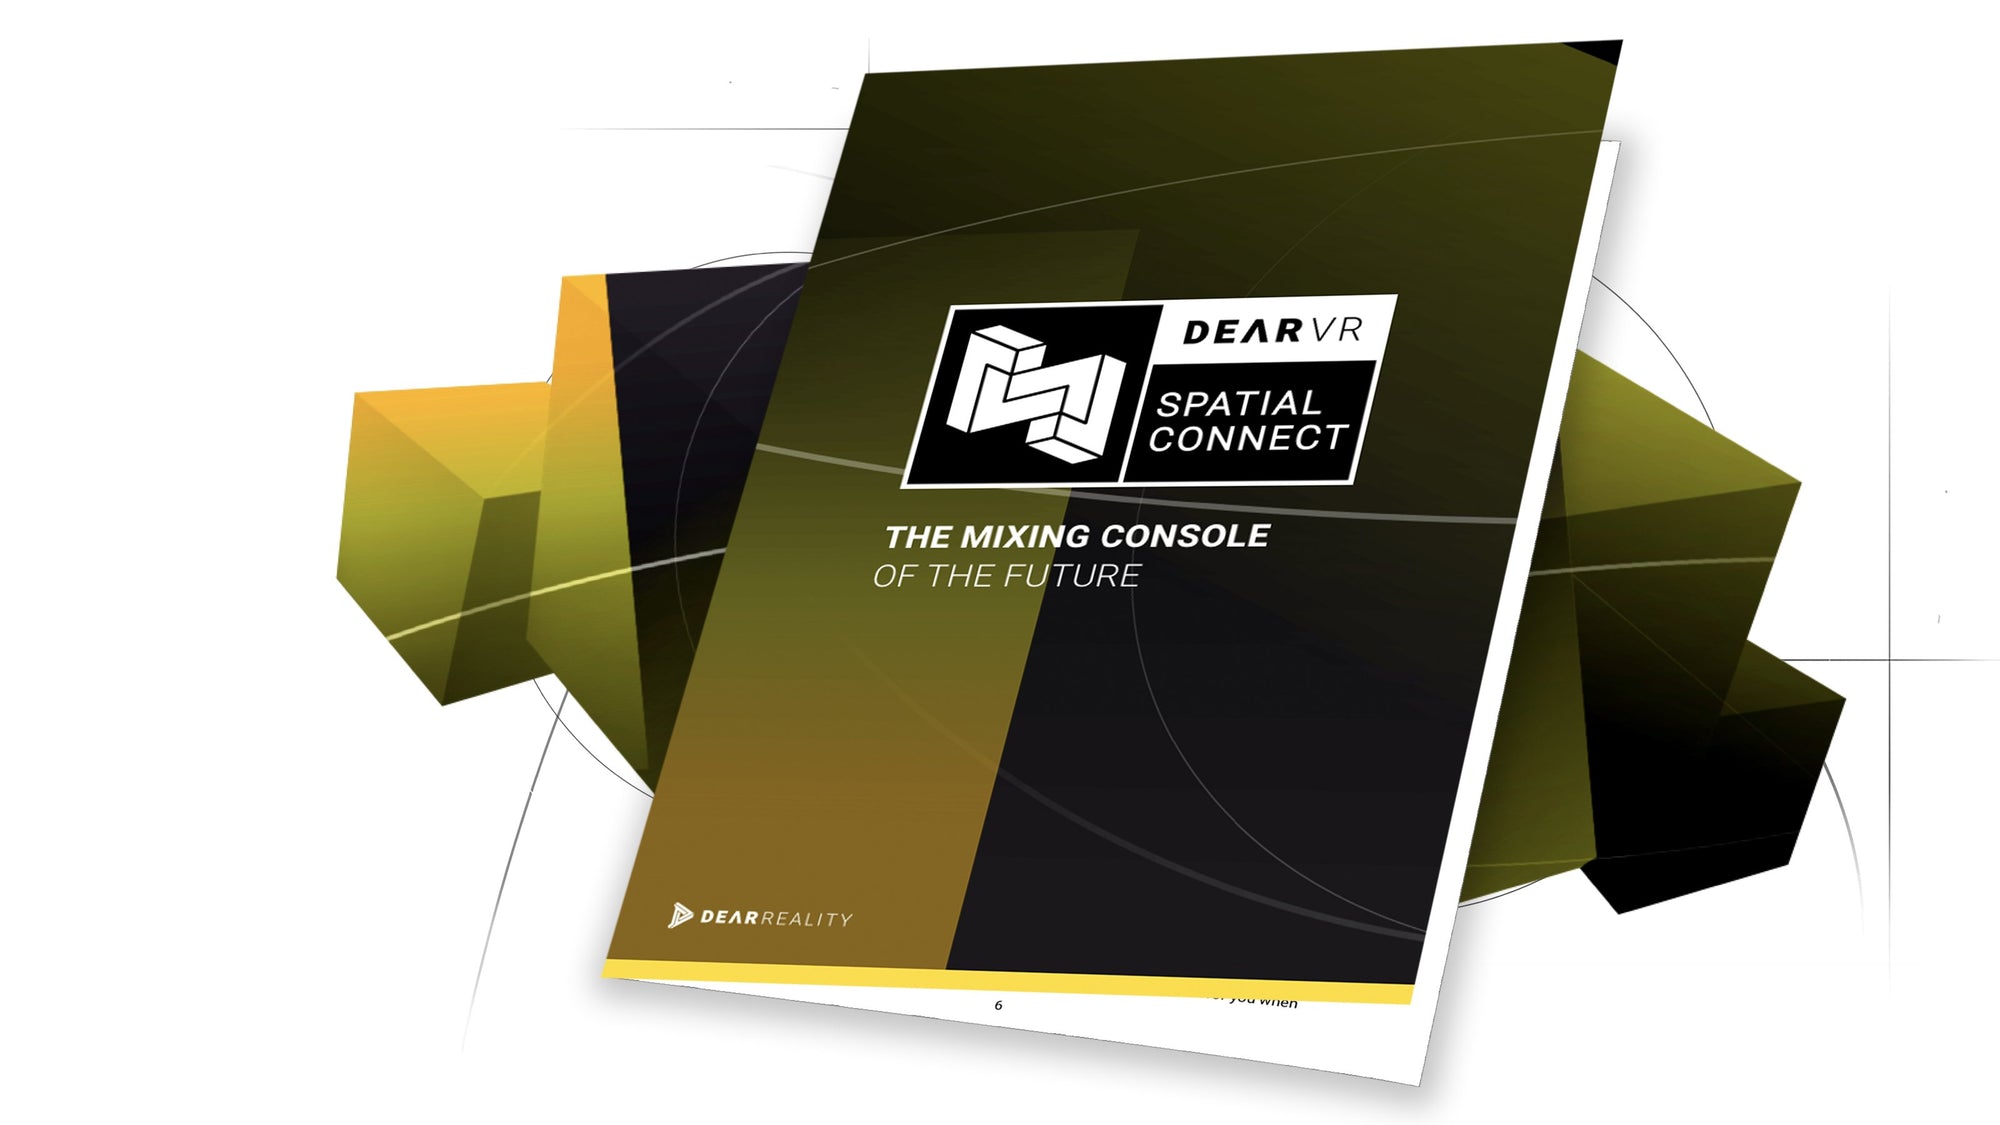 Download the dearVR SPATIAL CONNECT manual to get detailed insights